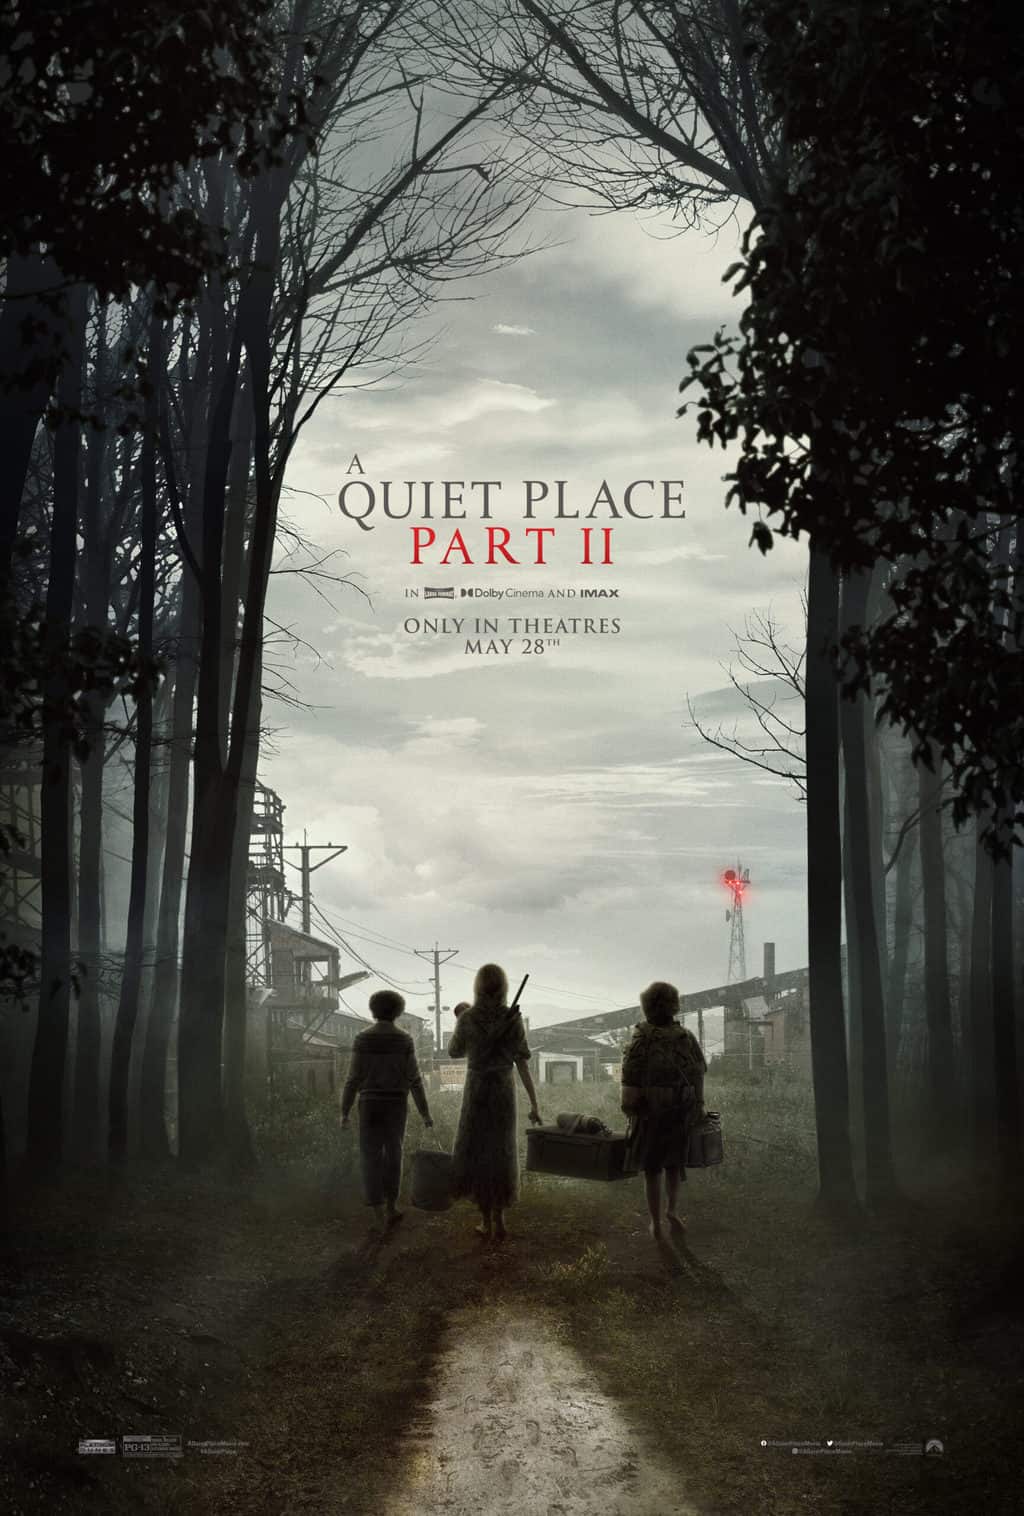 is a quiet place 2 safe for kids to watch? parent movie review poster